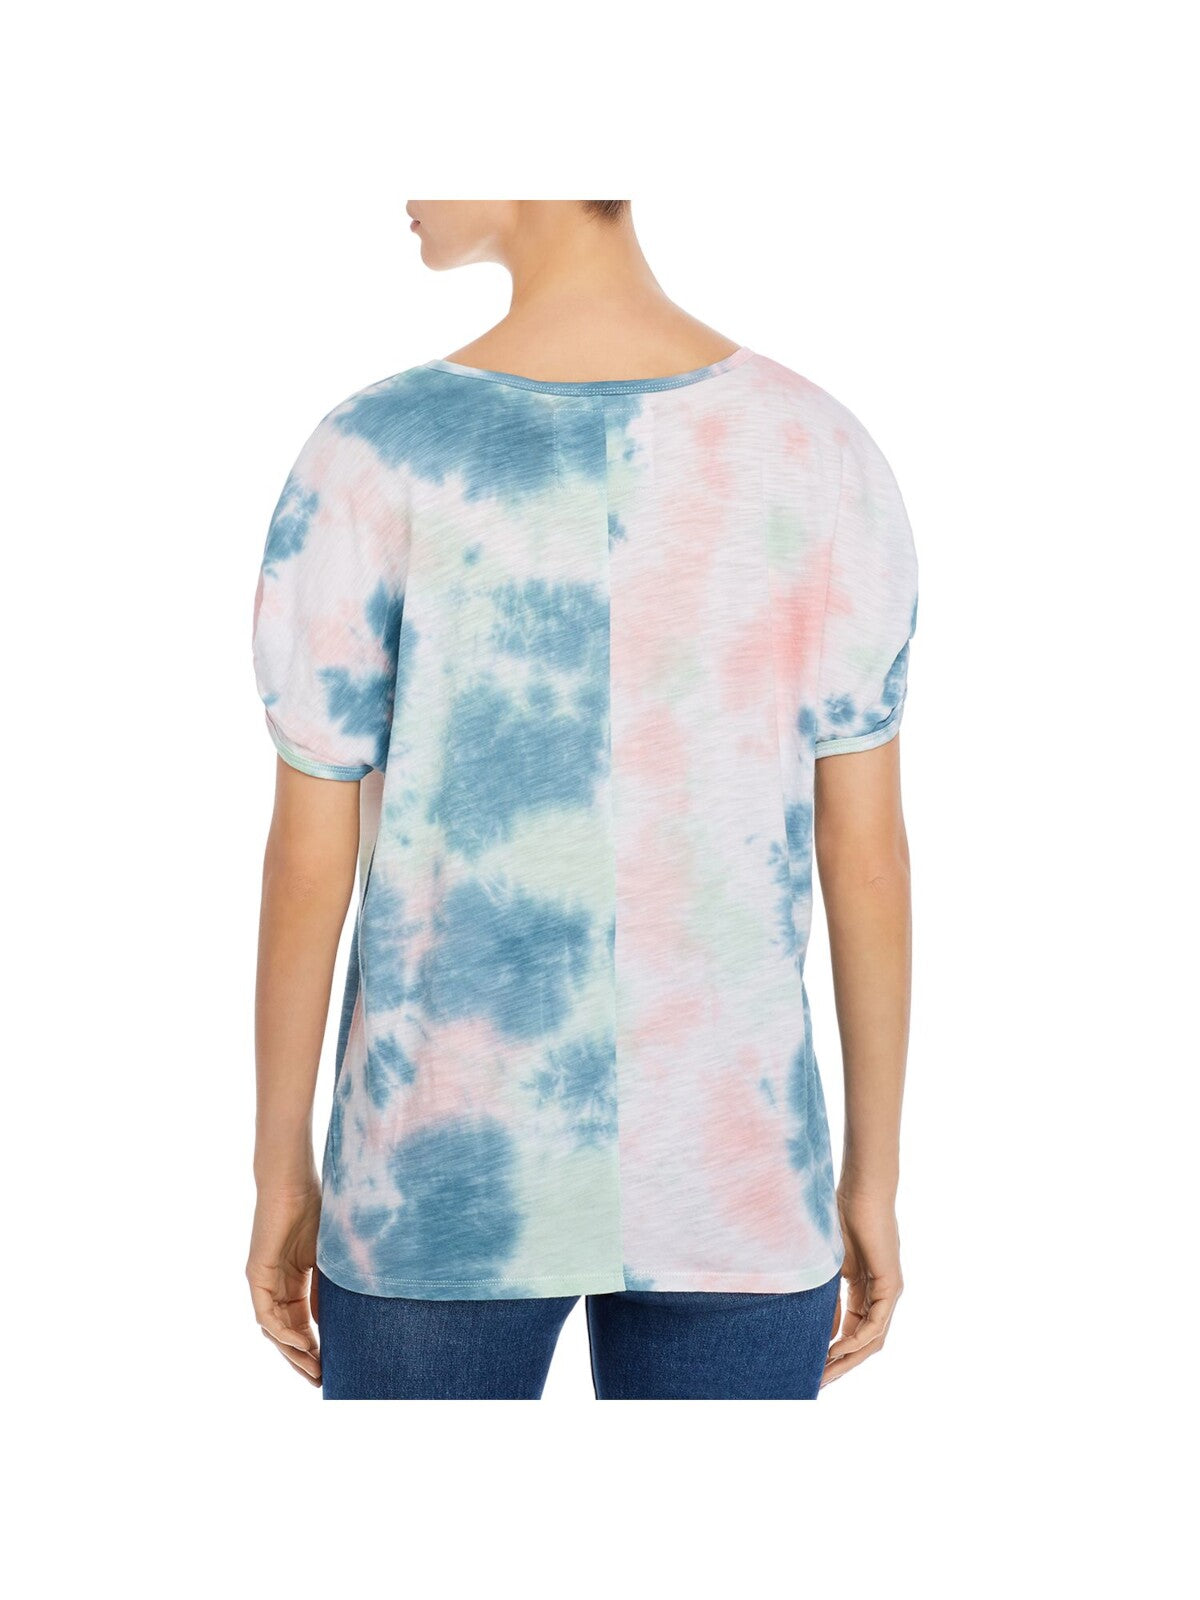 CUPIO BLUSH Womens Pink Ruched Pullover Styling Tie Dye Short Sleeve V Neck T-Shirt M